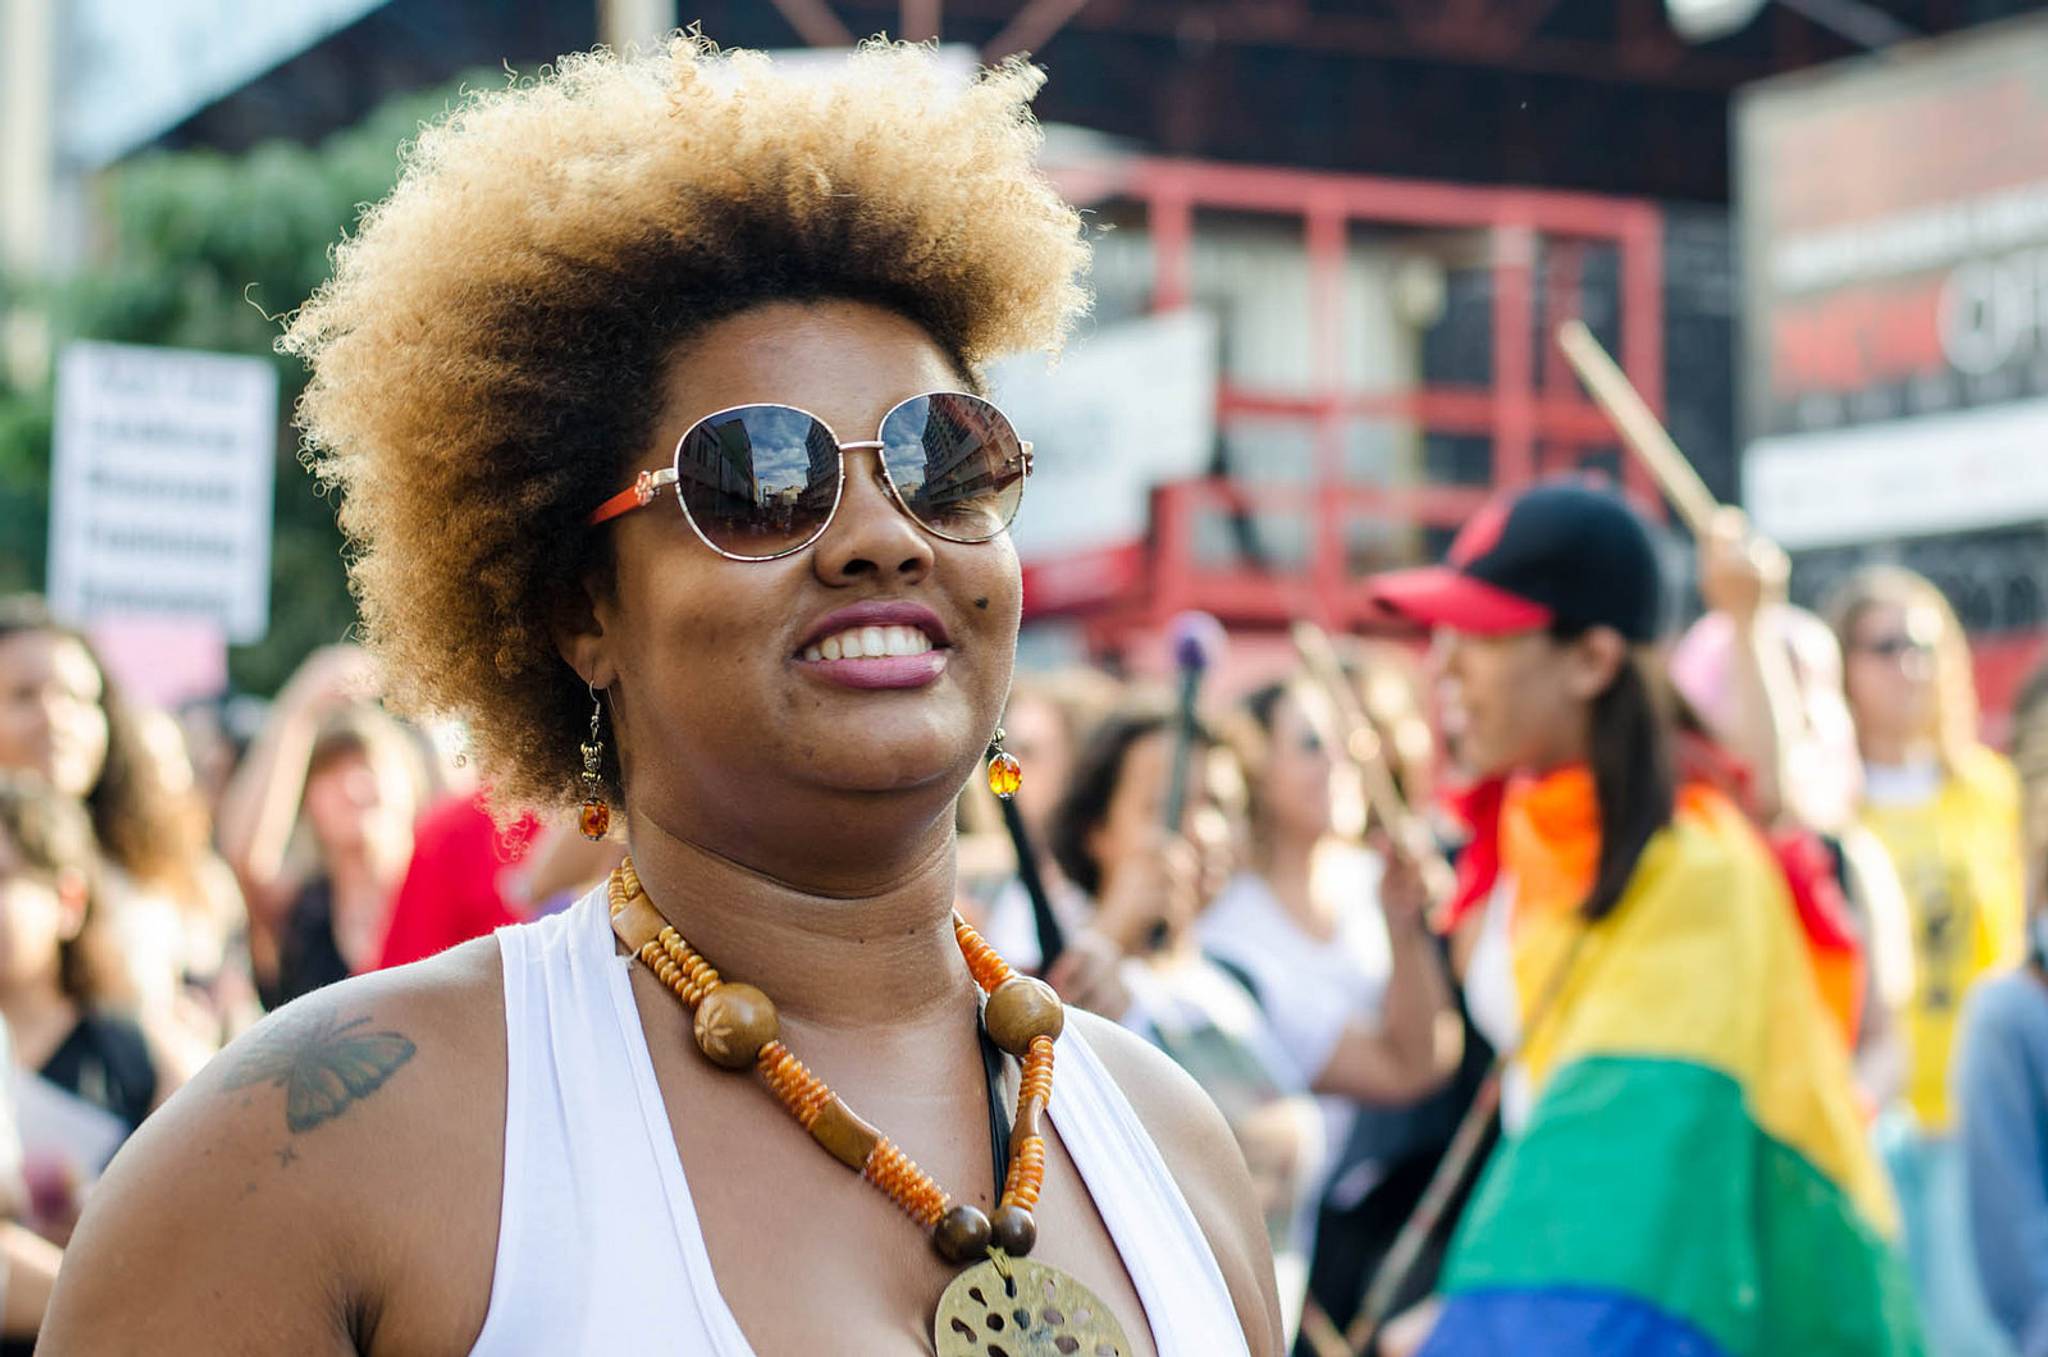 LGBTQ women don’t feel welcome at Pride